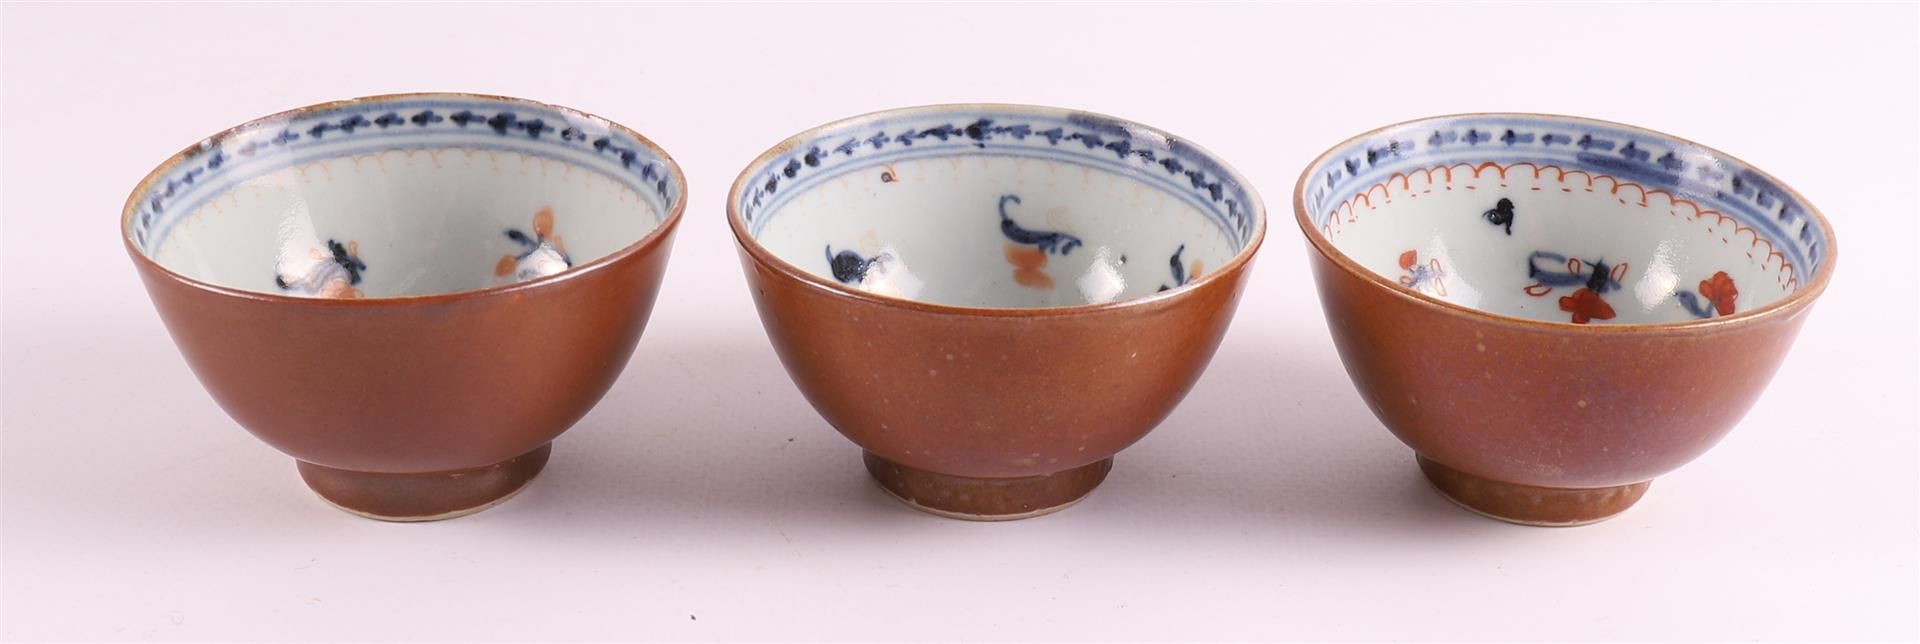 Various Chinese Imari porcelain cups and saucers, so-called Batavia ware, China - Image 11 of 16